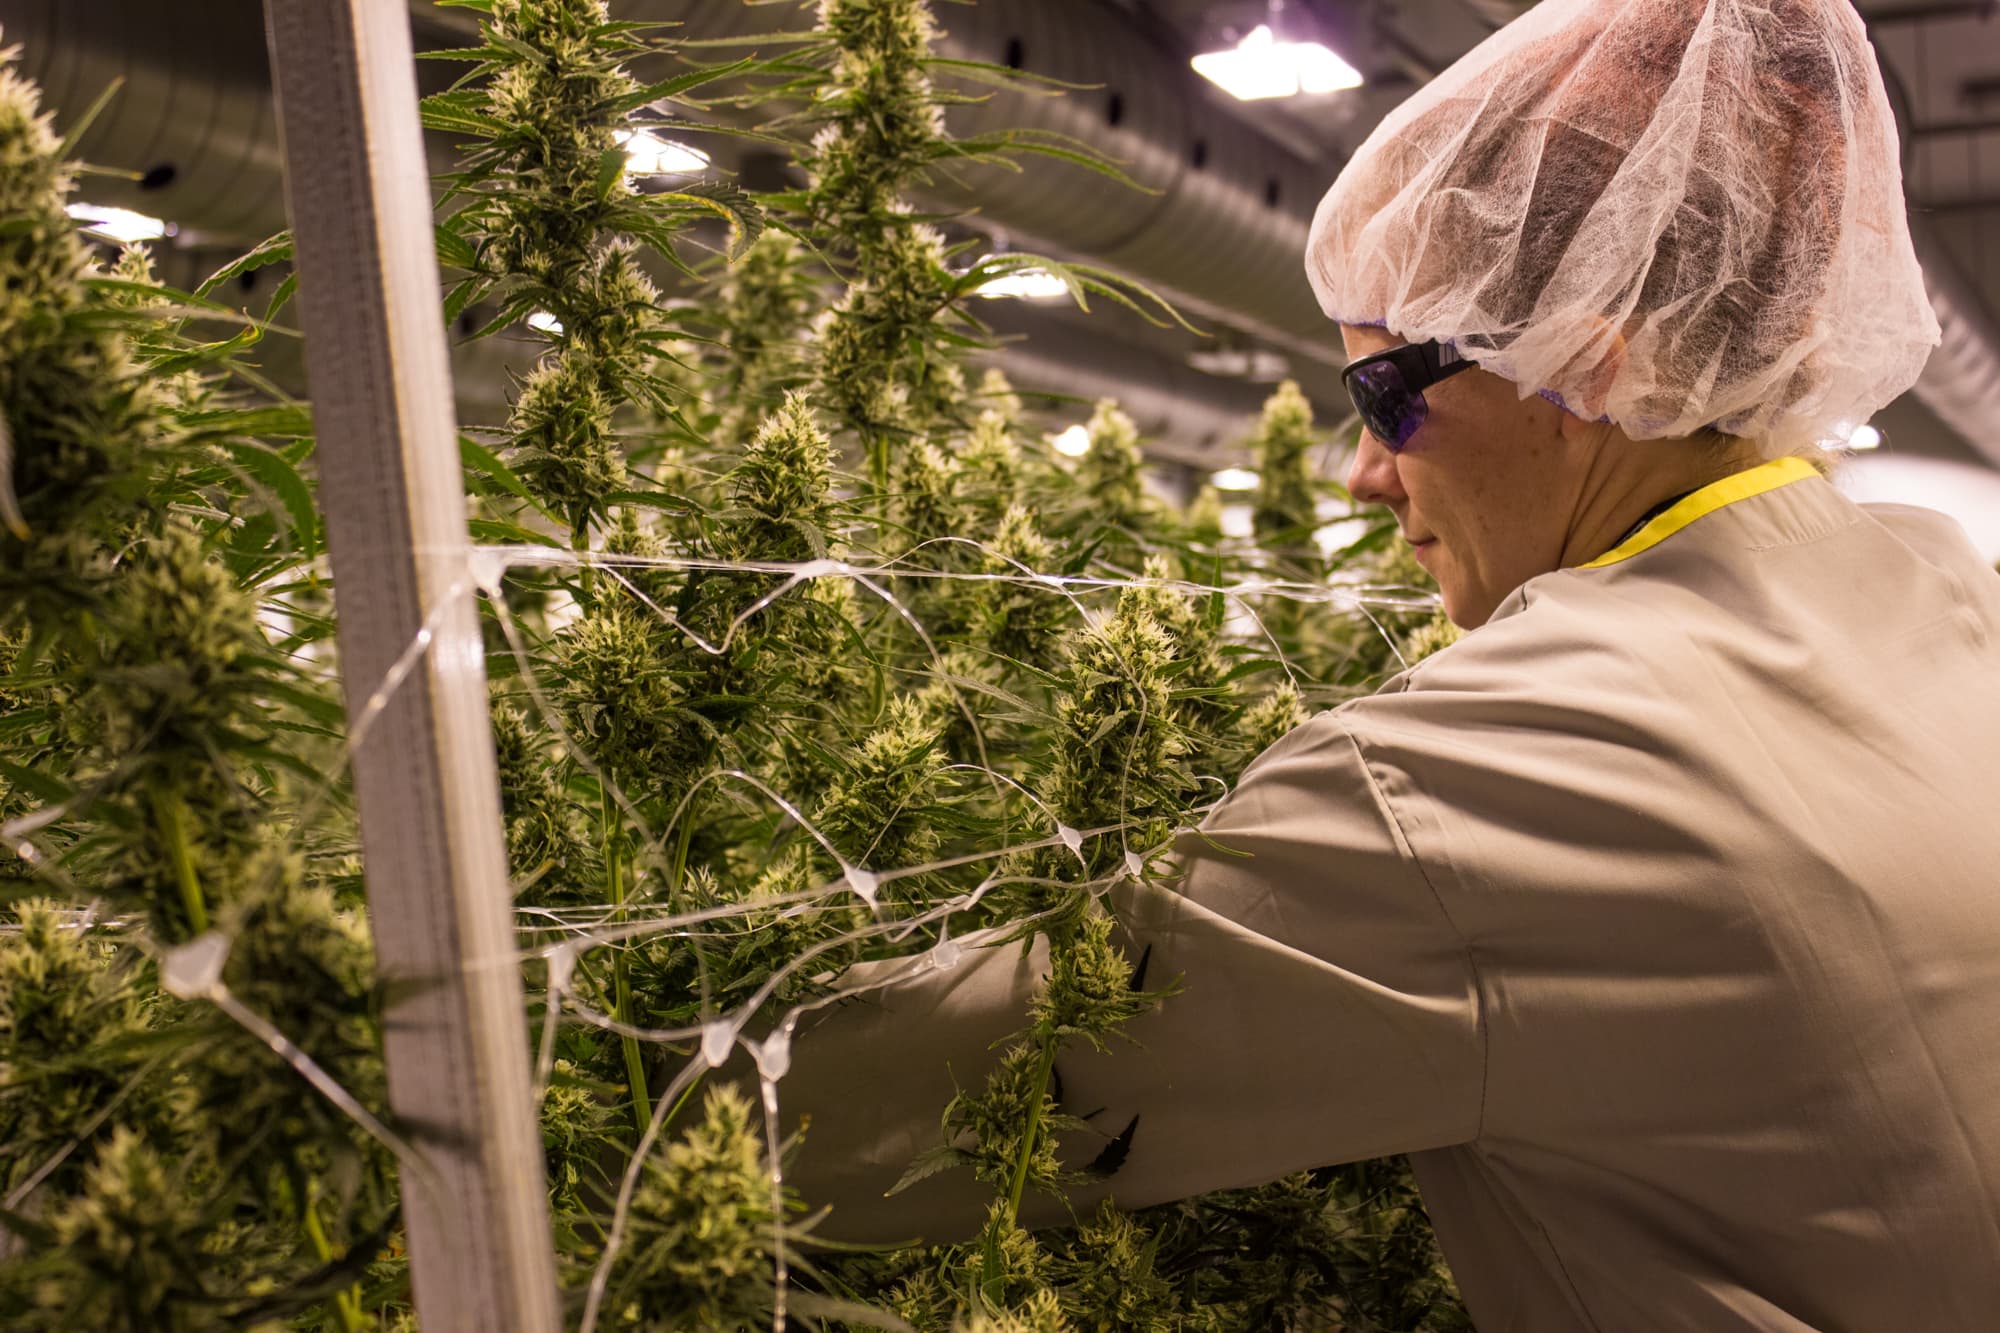 You can go to school for cannabis jobs—but it may not be necessary